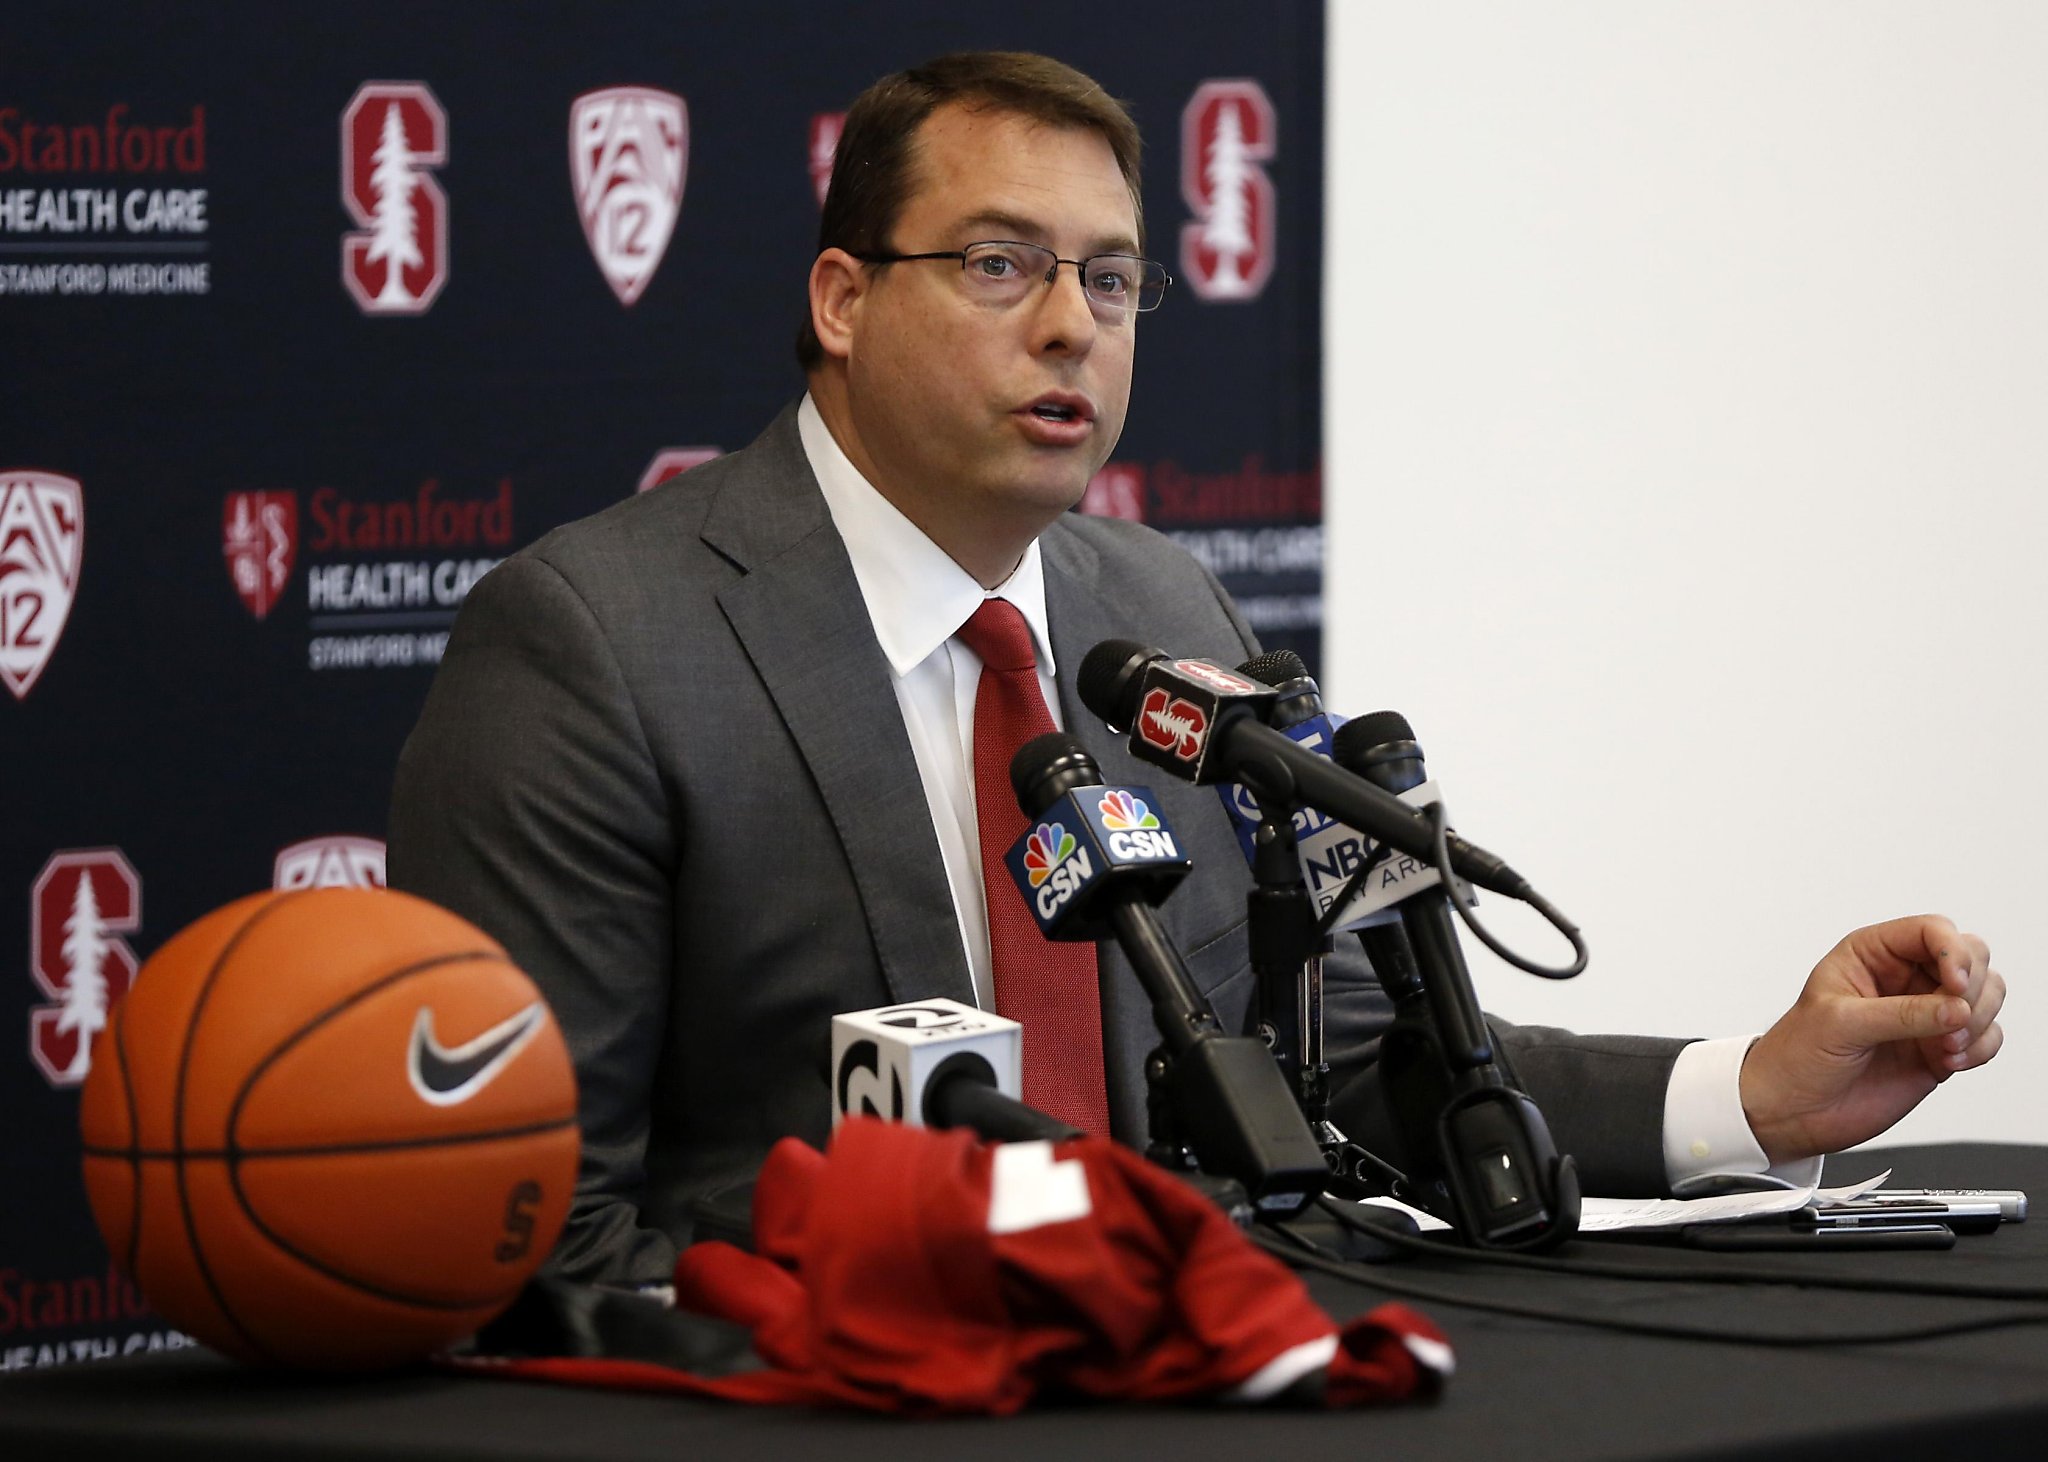 New Stanford coach Jerod Haase promises 'an attack mentality'